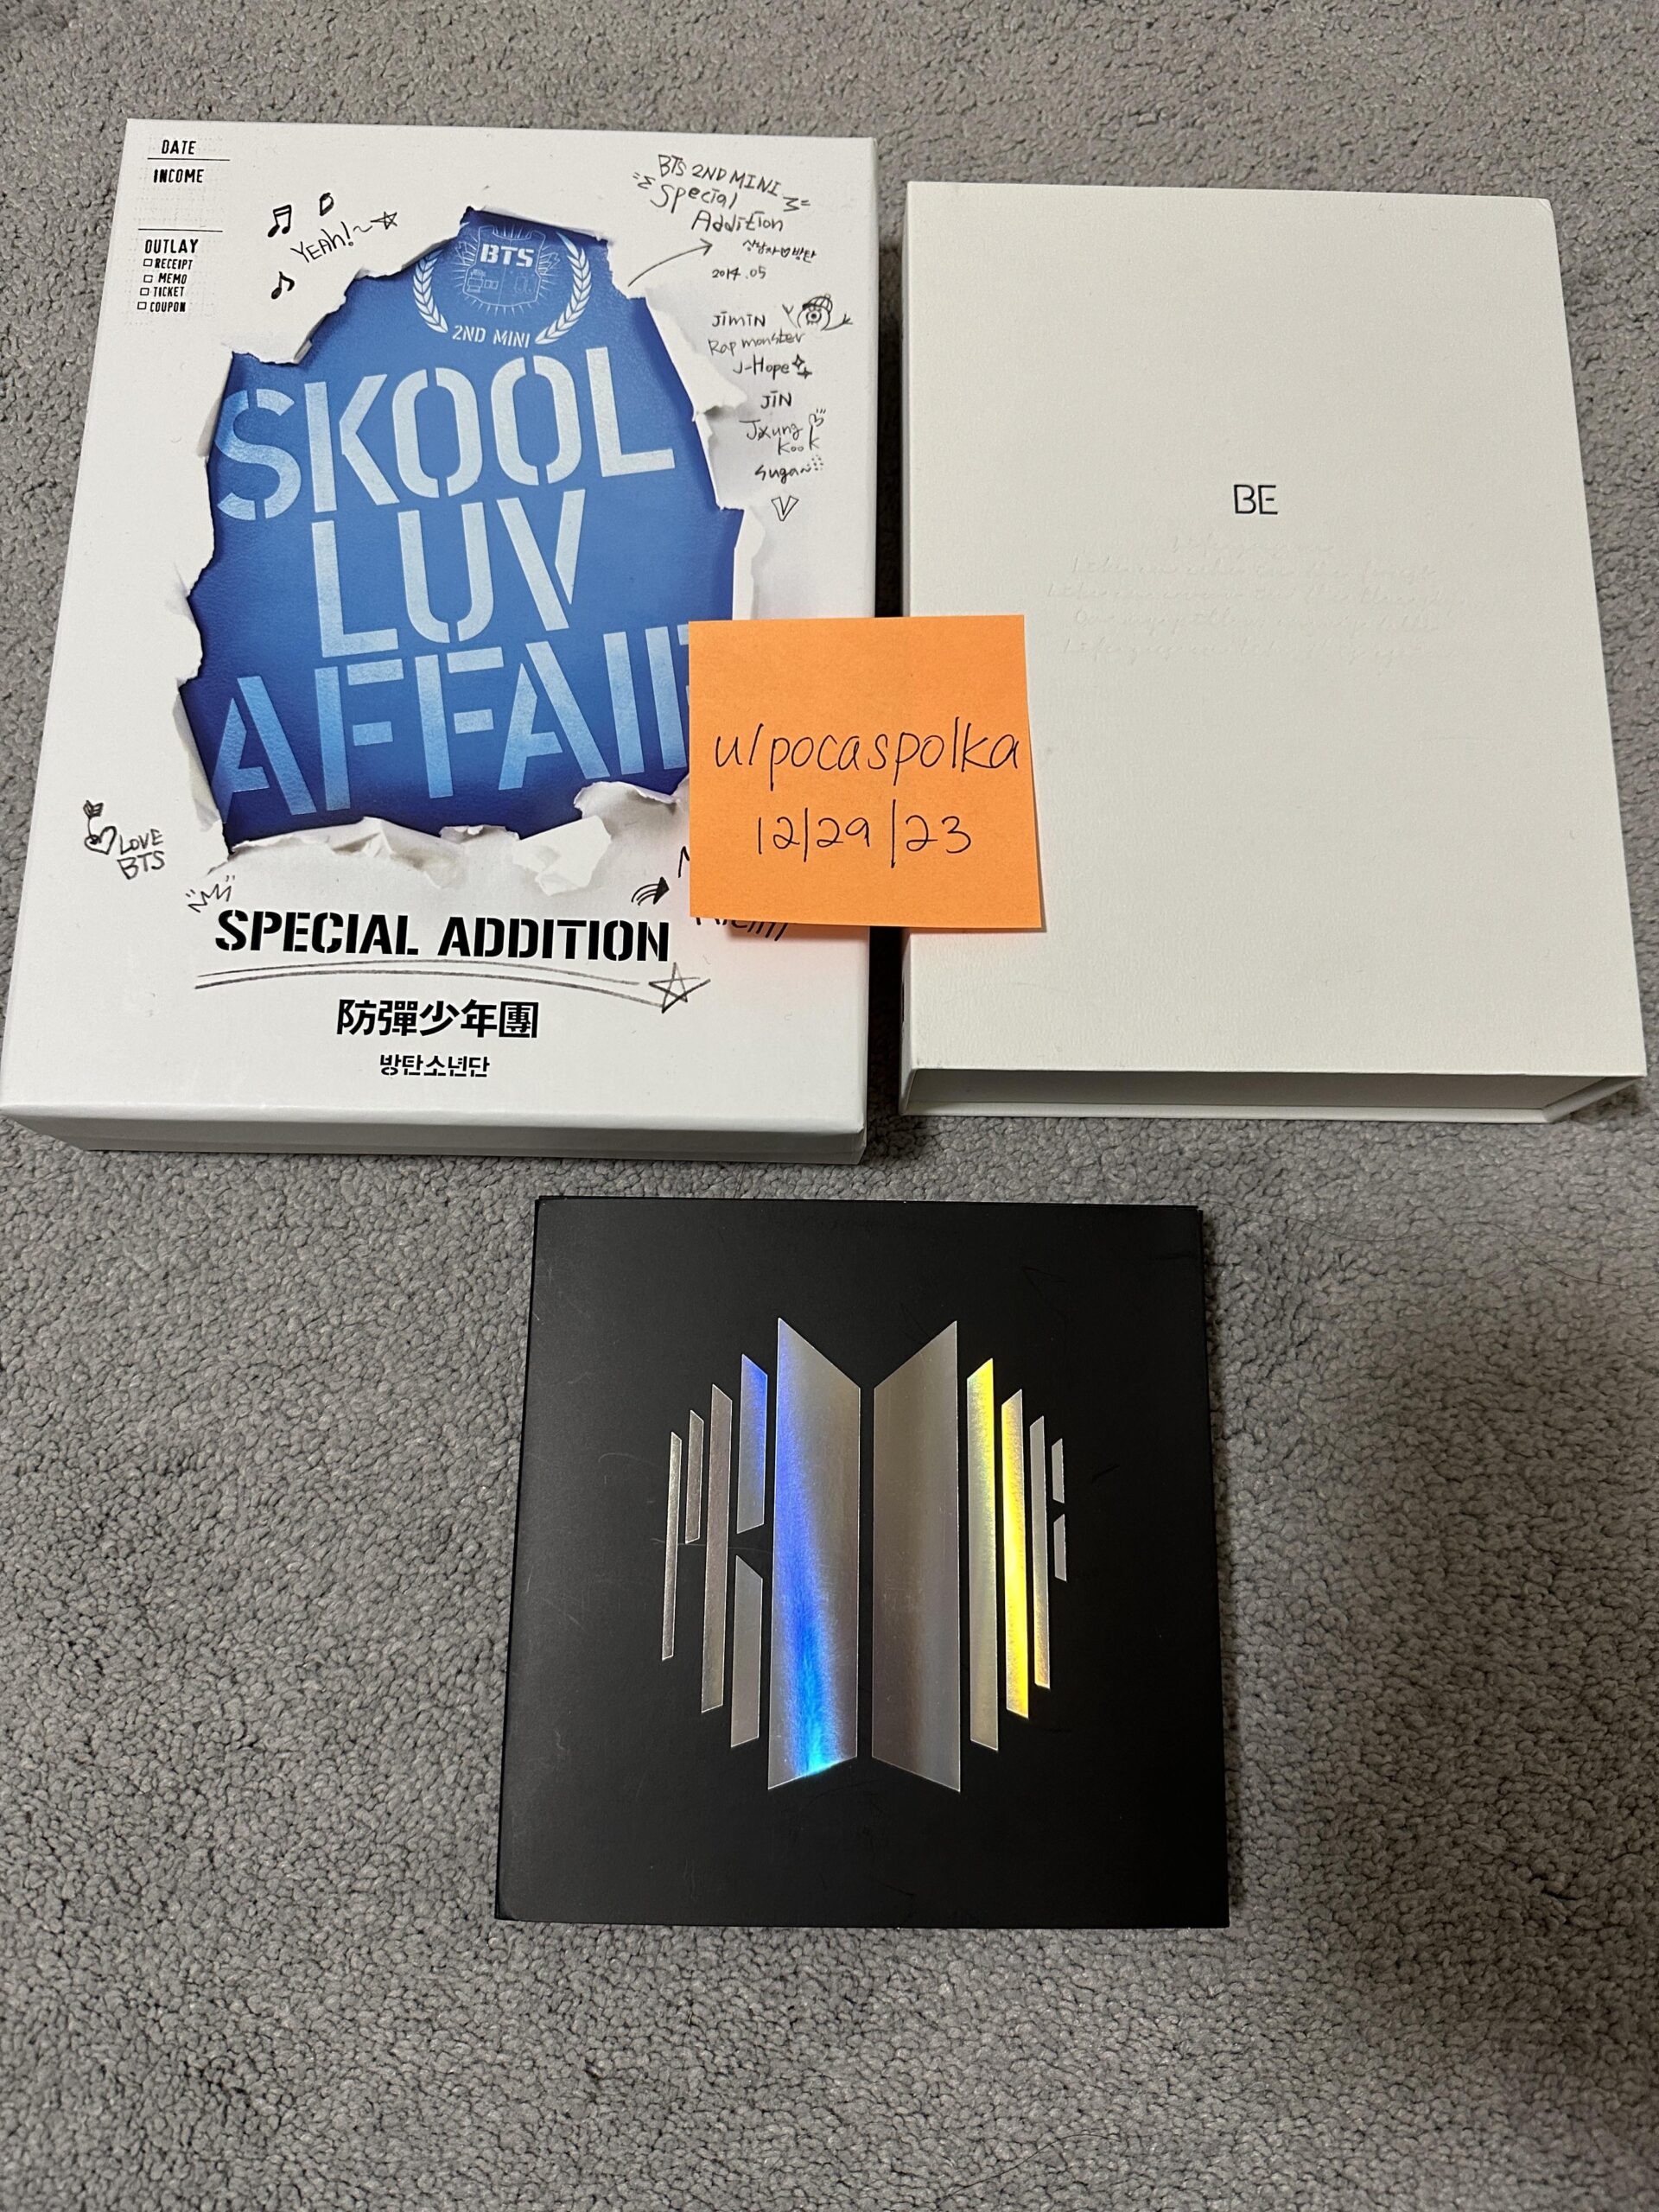 [WTS] [US ONLY] Free albums, just pay shipping